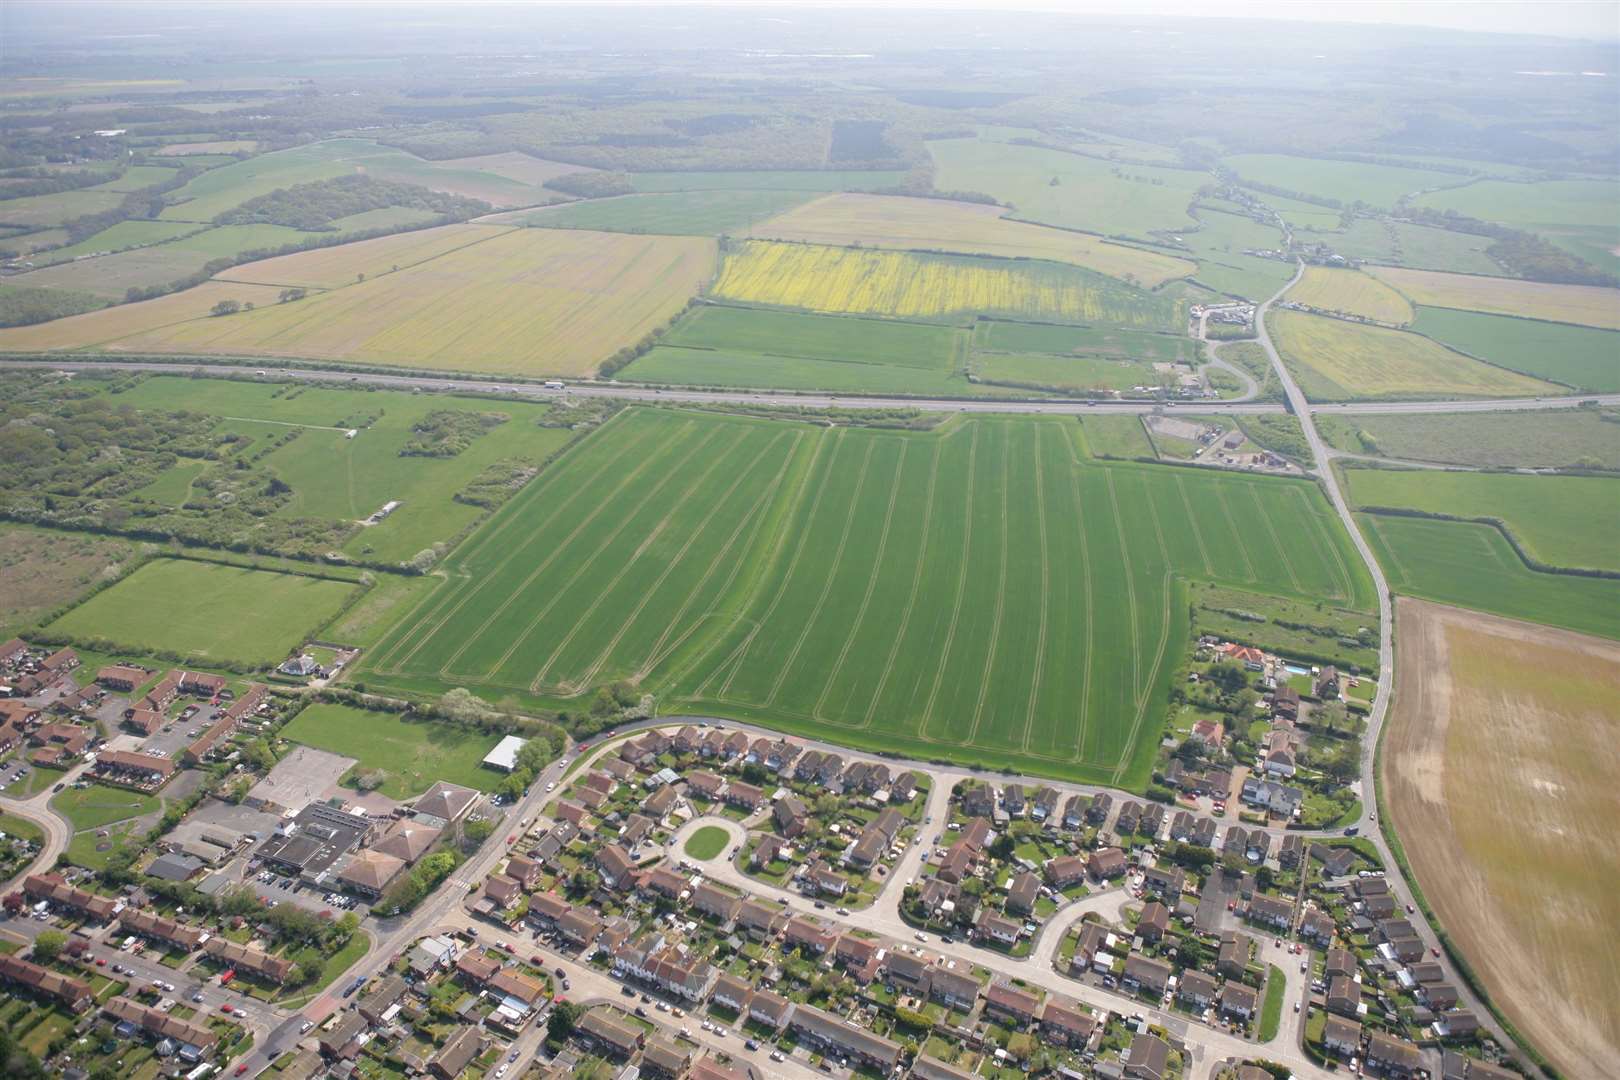 The land in Greenhill had been earmarked for development in Canterbury City Council's Local Plan in 2017